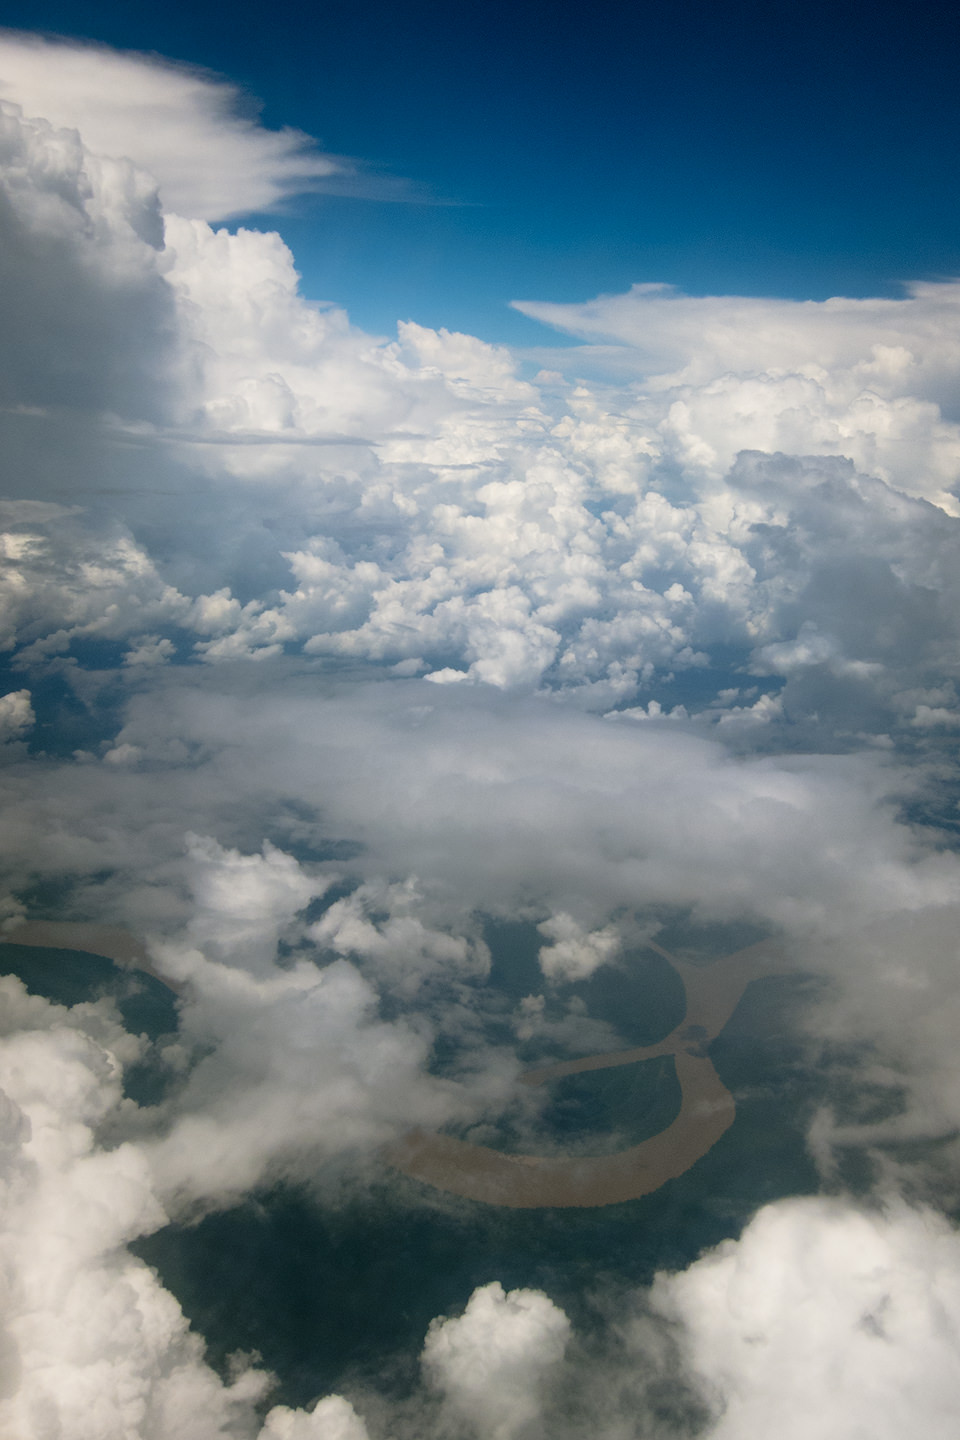 Aerial view of the Amazon river and clouds.